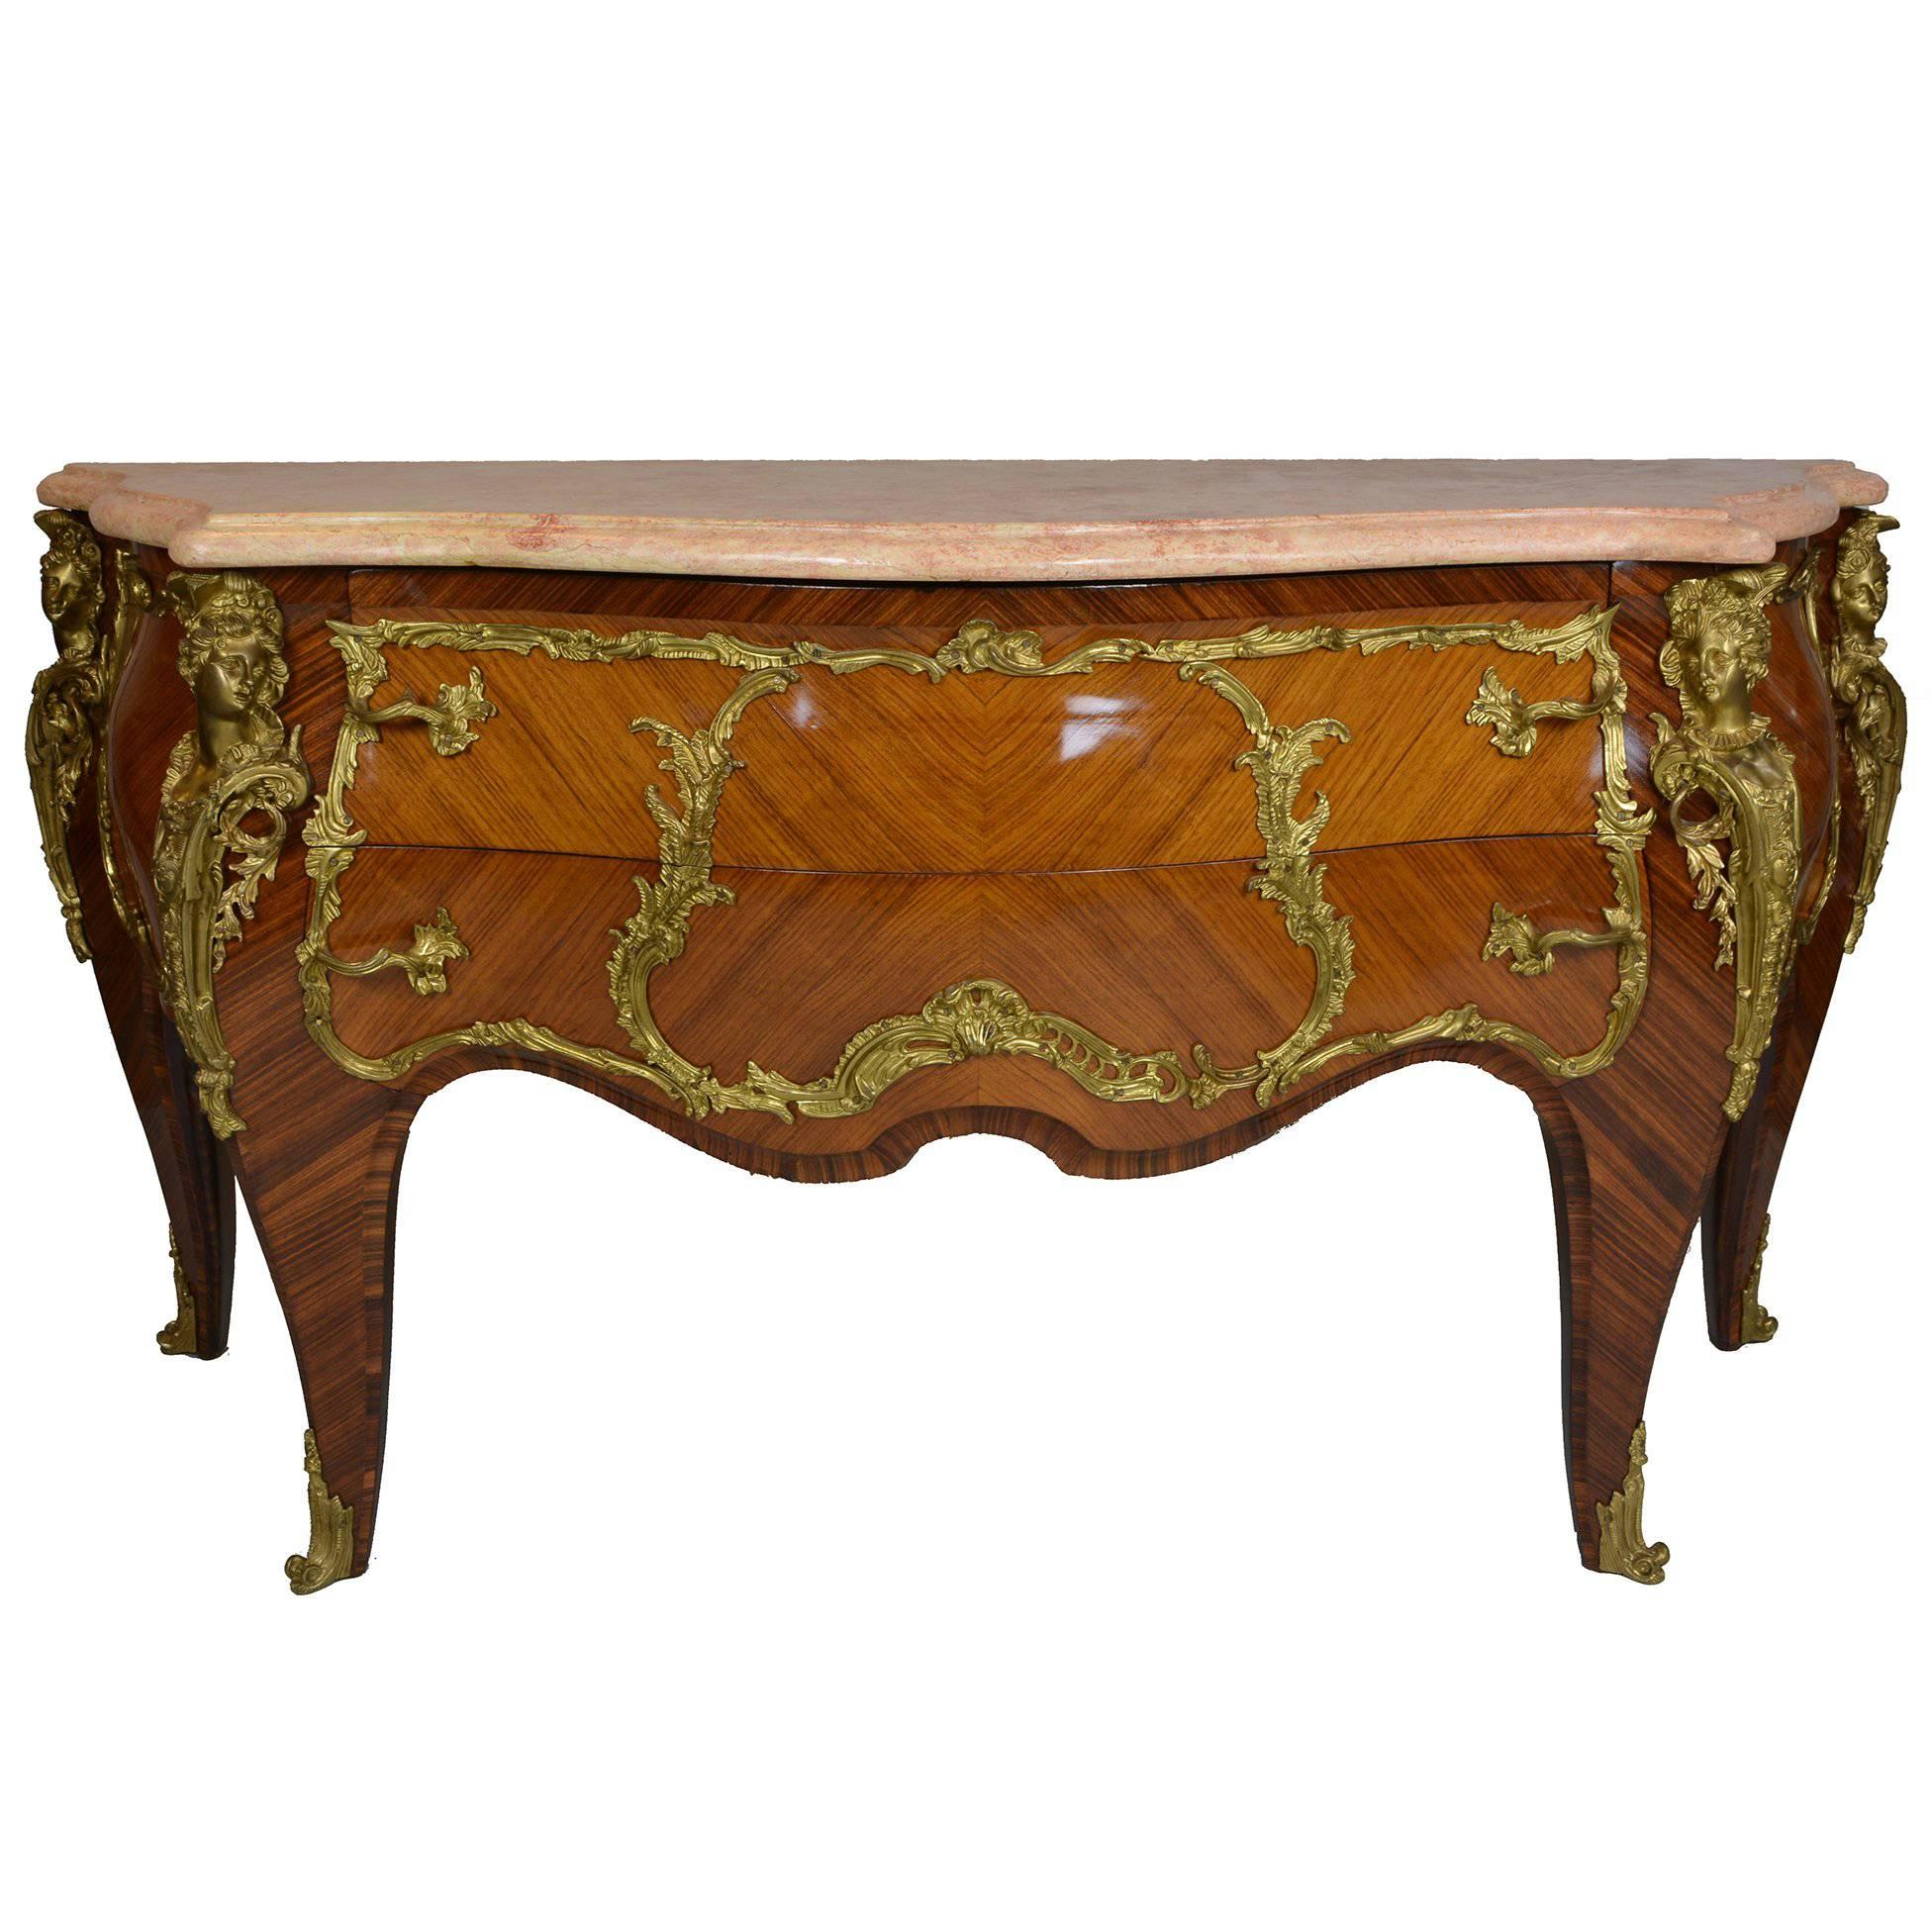 Louis XV Style Gilt Bronze-Mounted Marquetry Commode